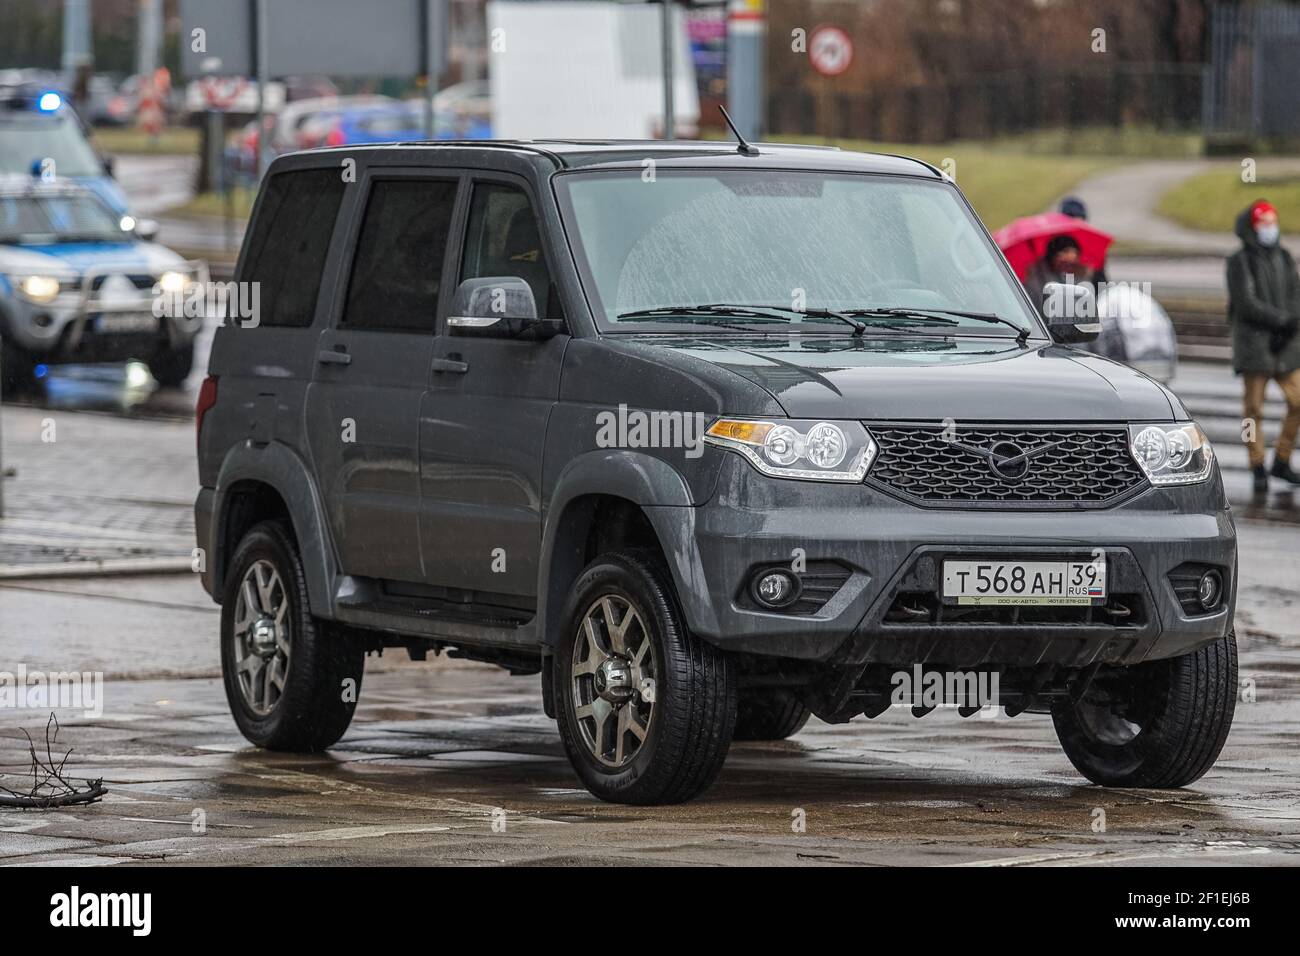 Gdansk, Poland 7th, March 2021 Russian UAZ Patriot SUV is seen in Gdansk,  Poland on 7 March 2021 The UAZ Patriot model UAZ-3163 is a mid-size body on  frame 4x4 SUV produced